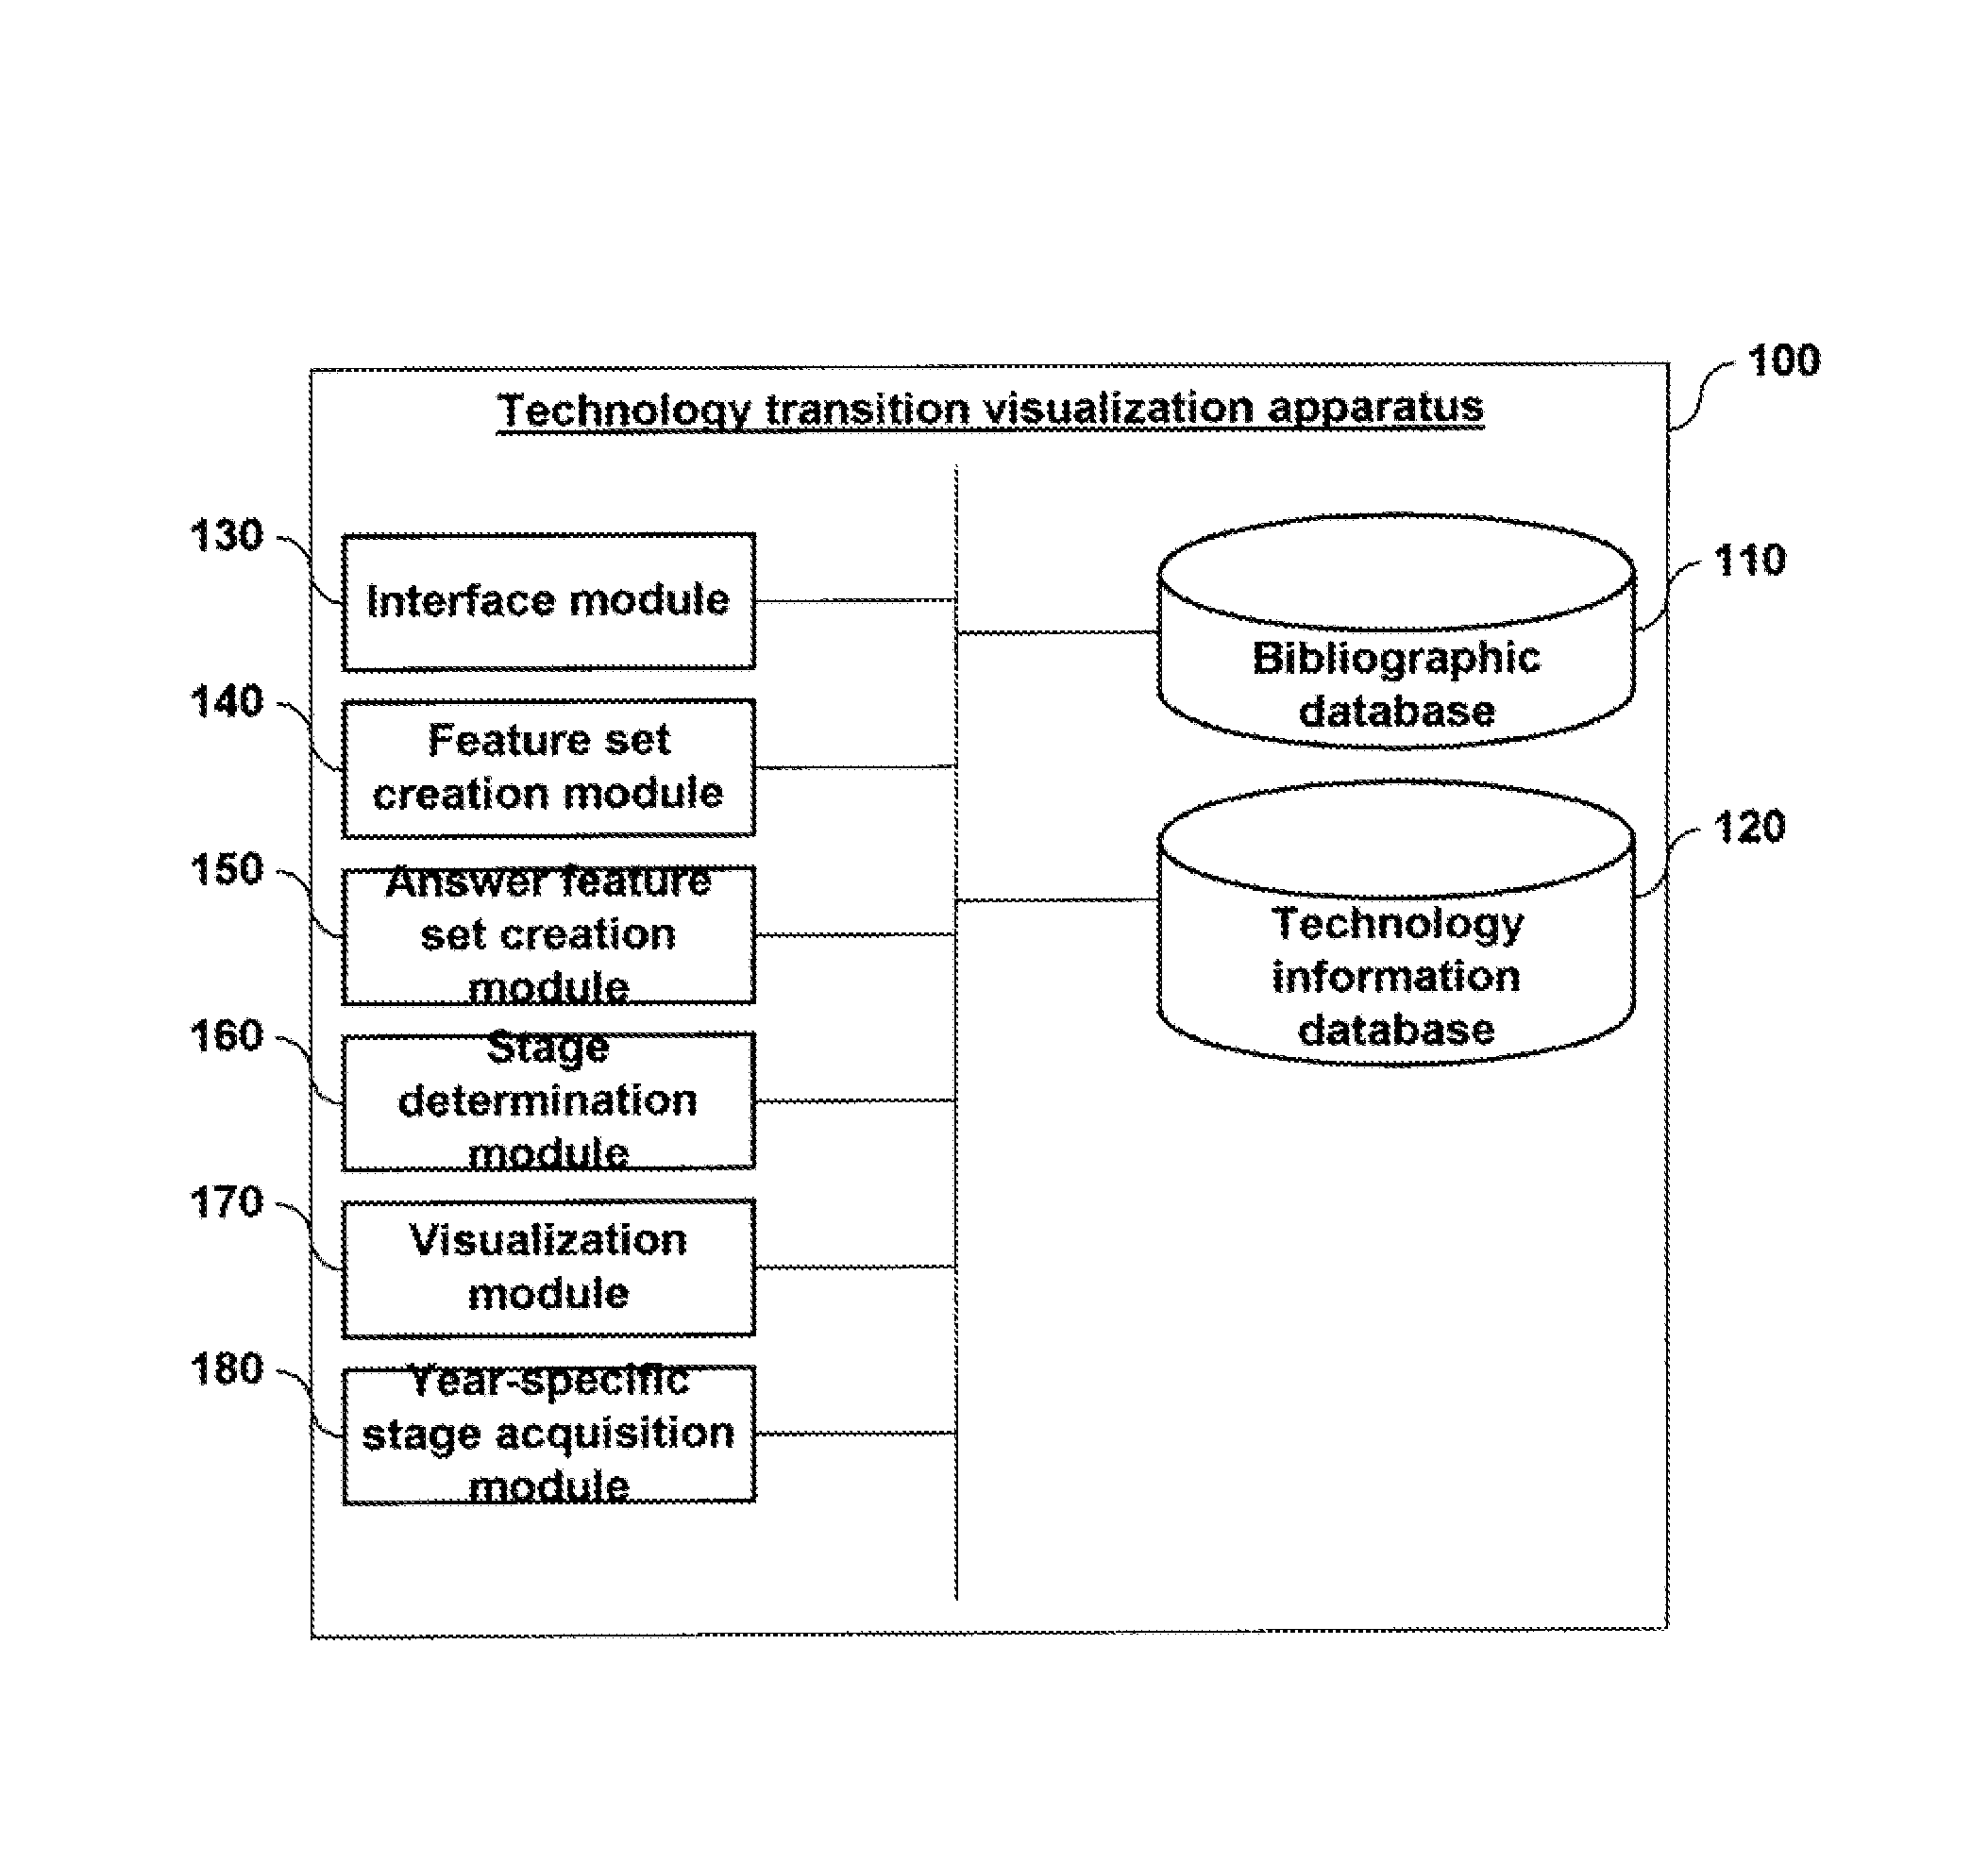 Apparatus and method for visualizing technology change